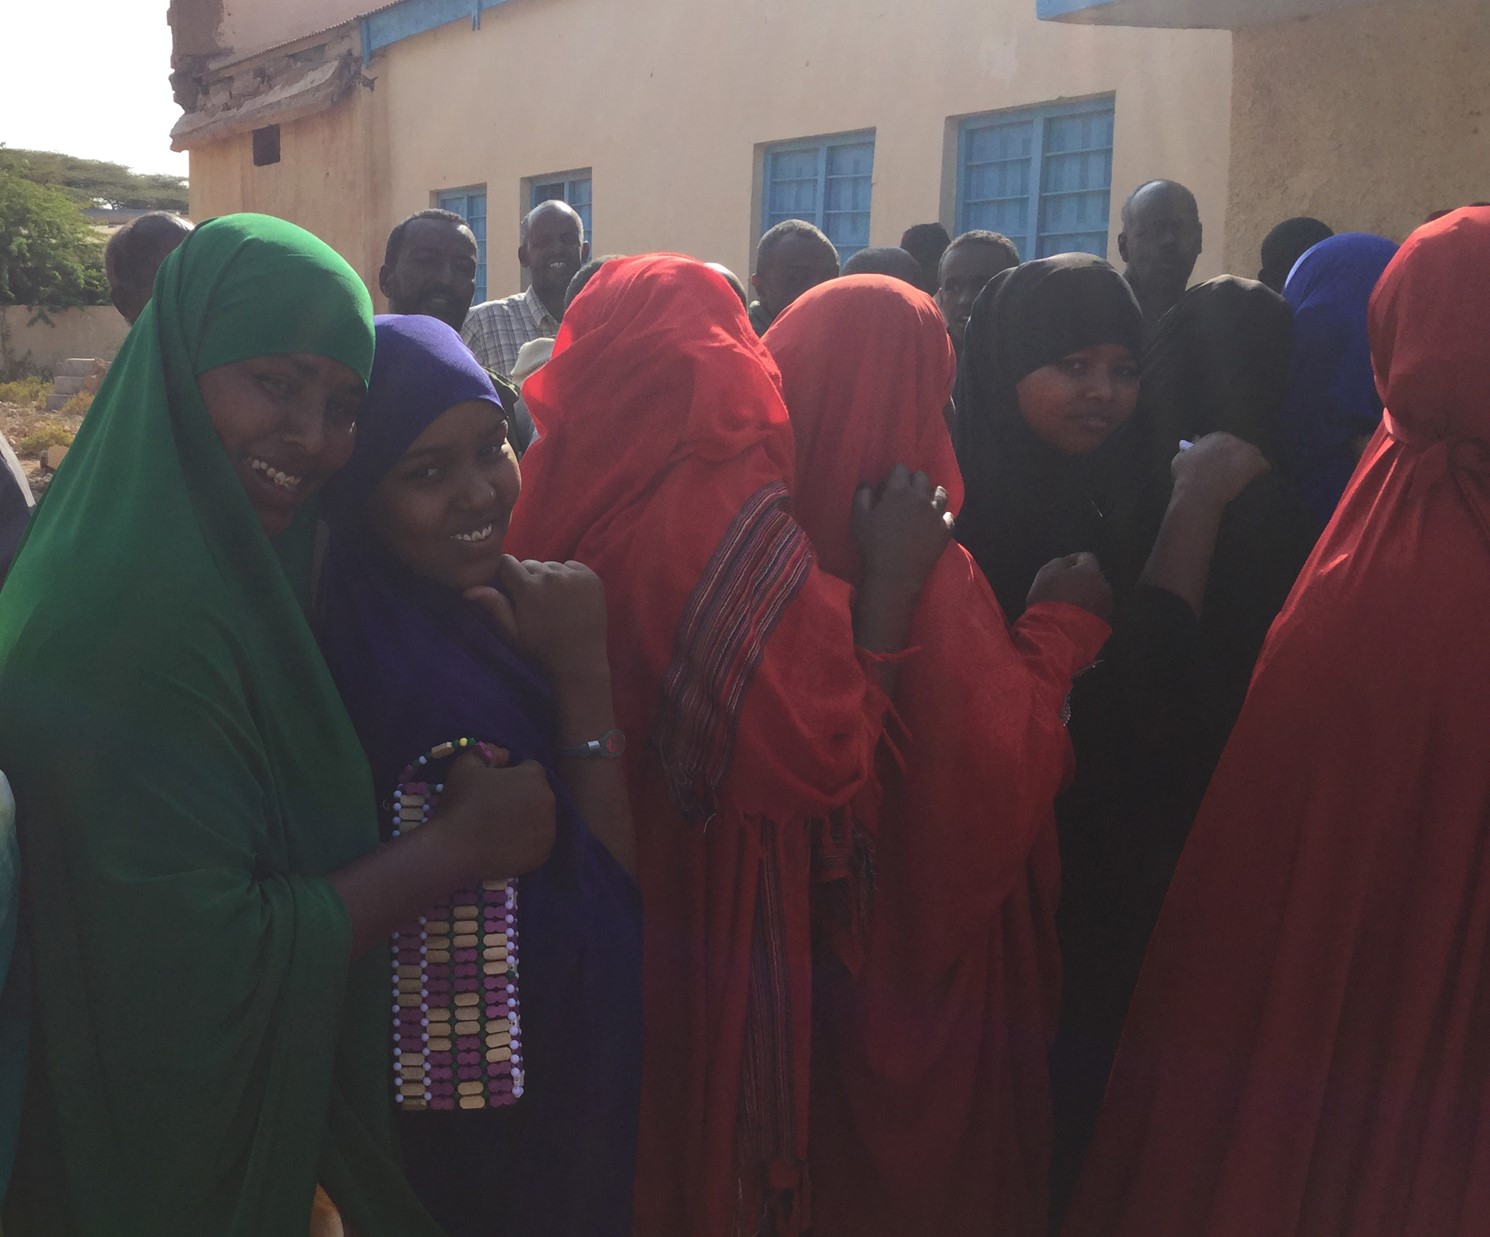 Young women queue to register their vote in Hargeisa, Somaliland